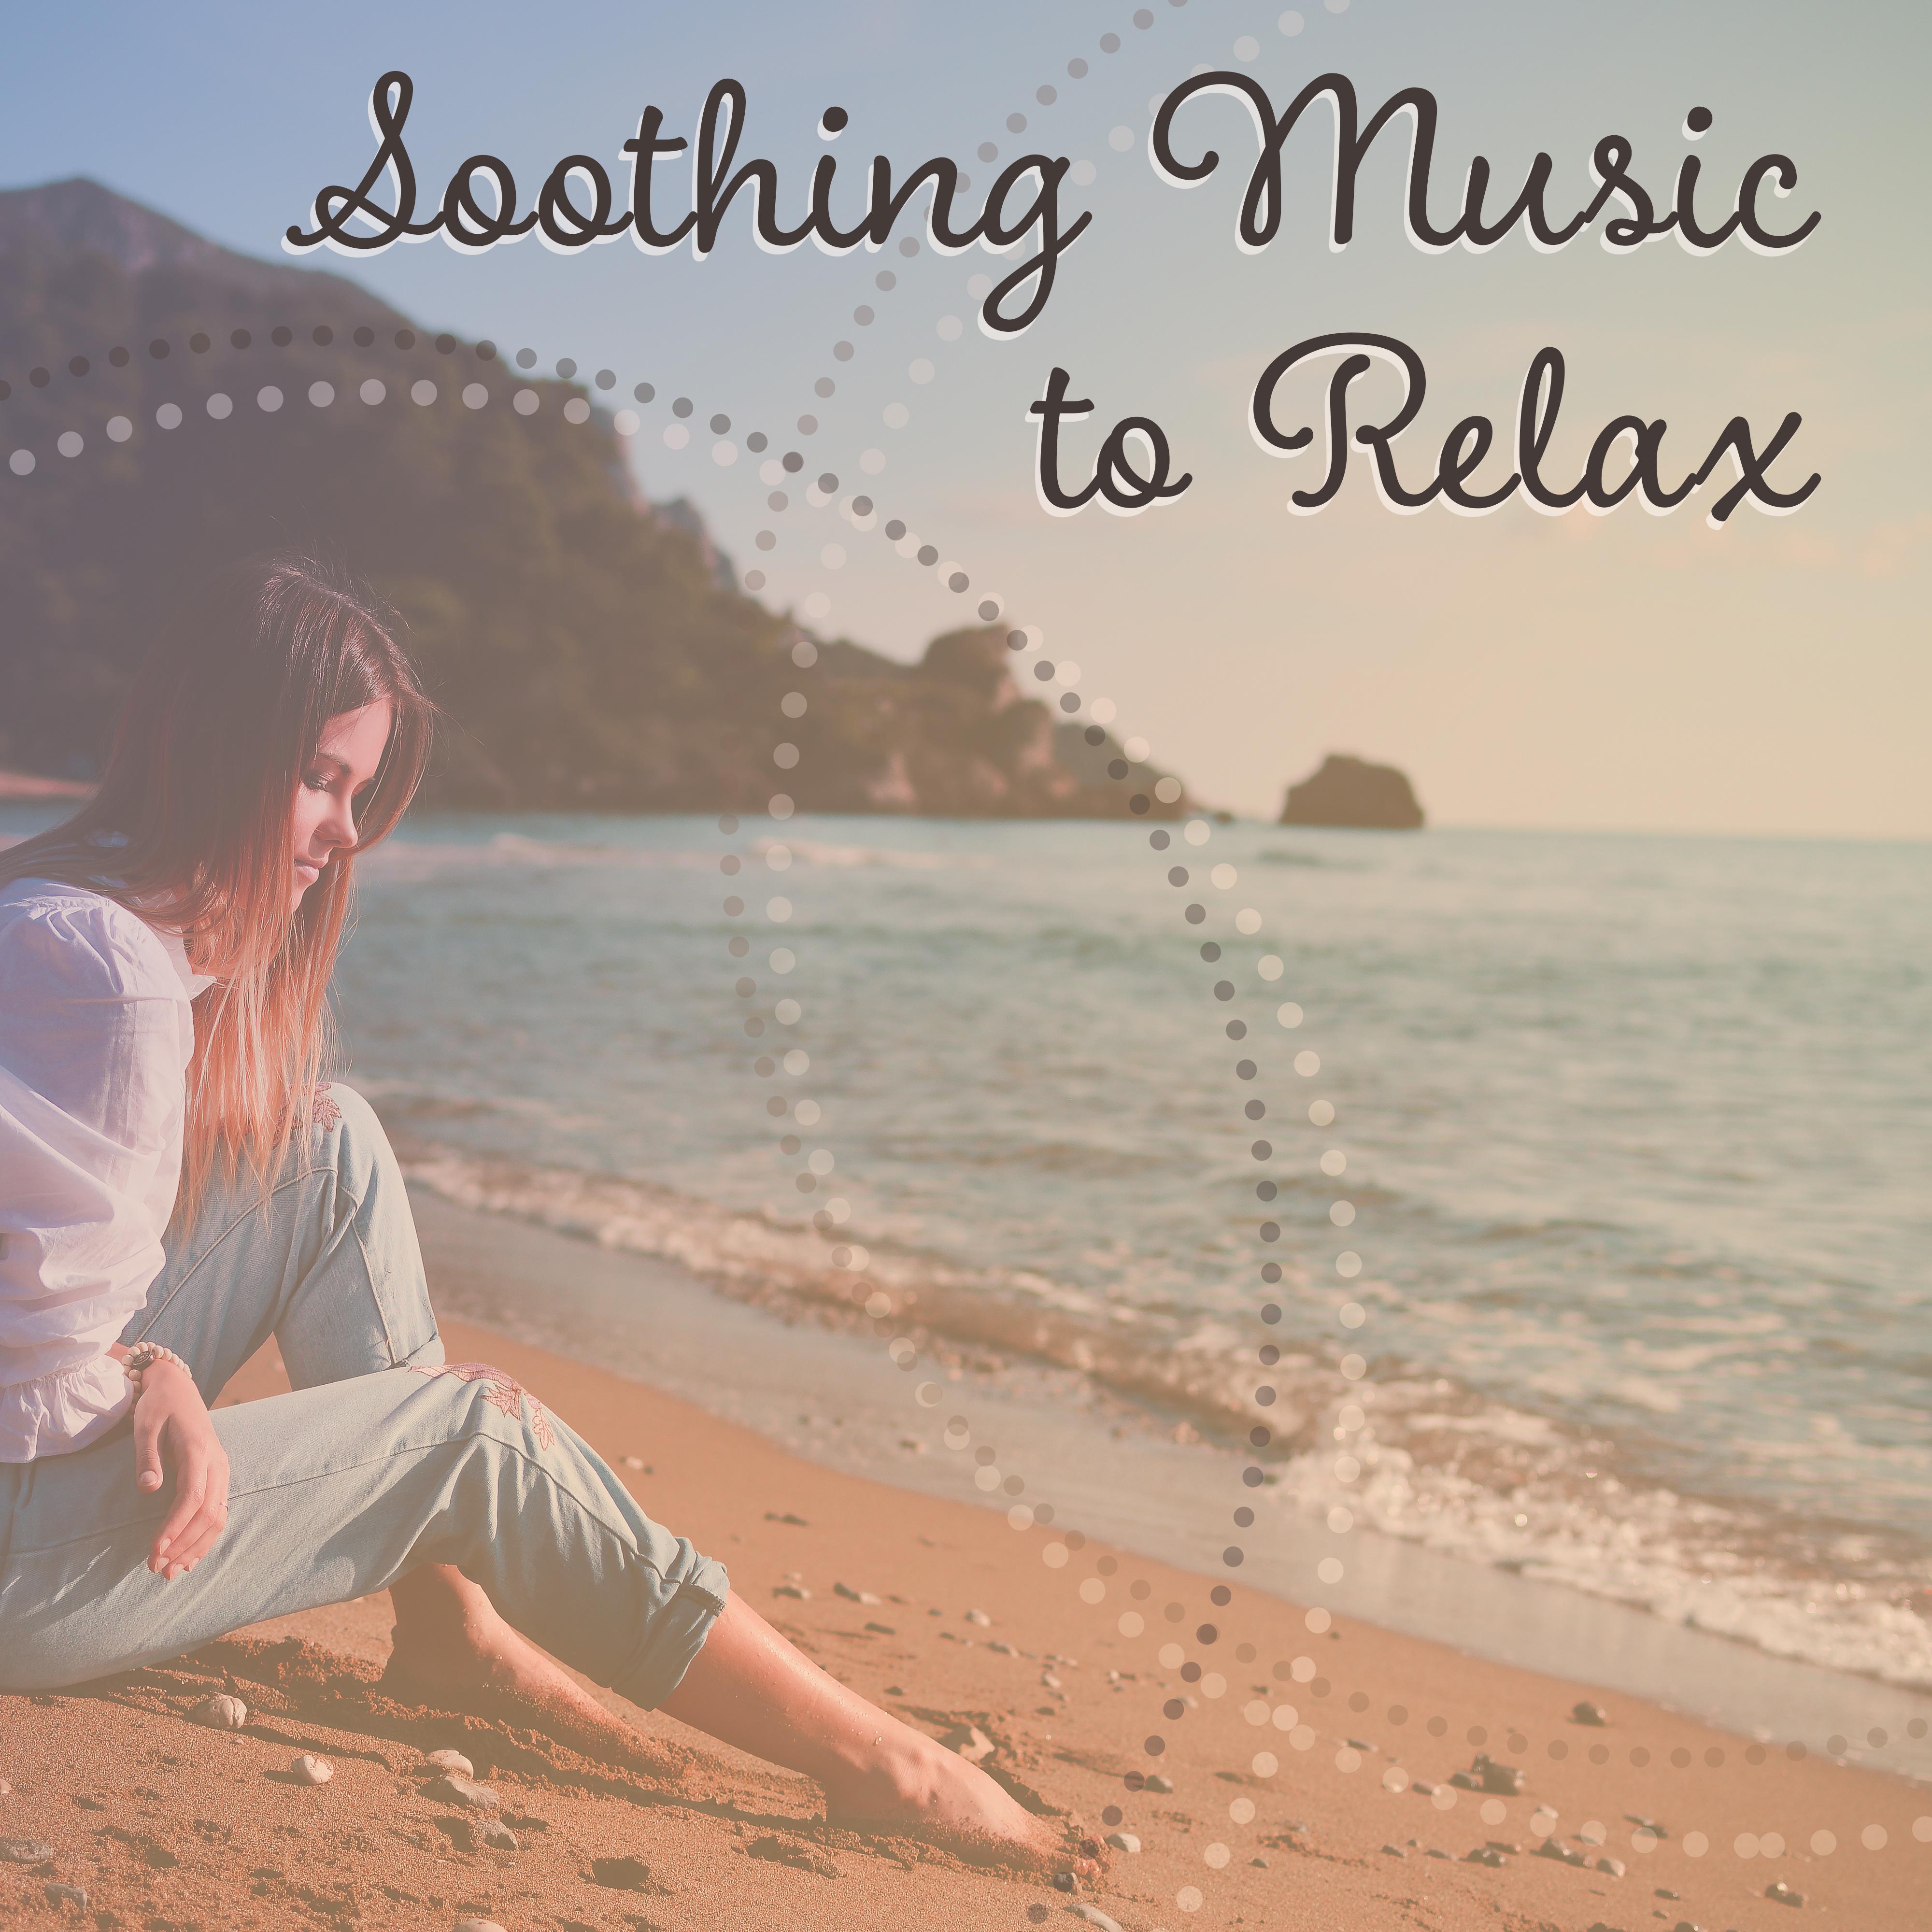 Soothing Music to Relax – Easy Listening, Sounds to Calm Down, Spiritual Relaxation, New Age Music